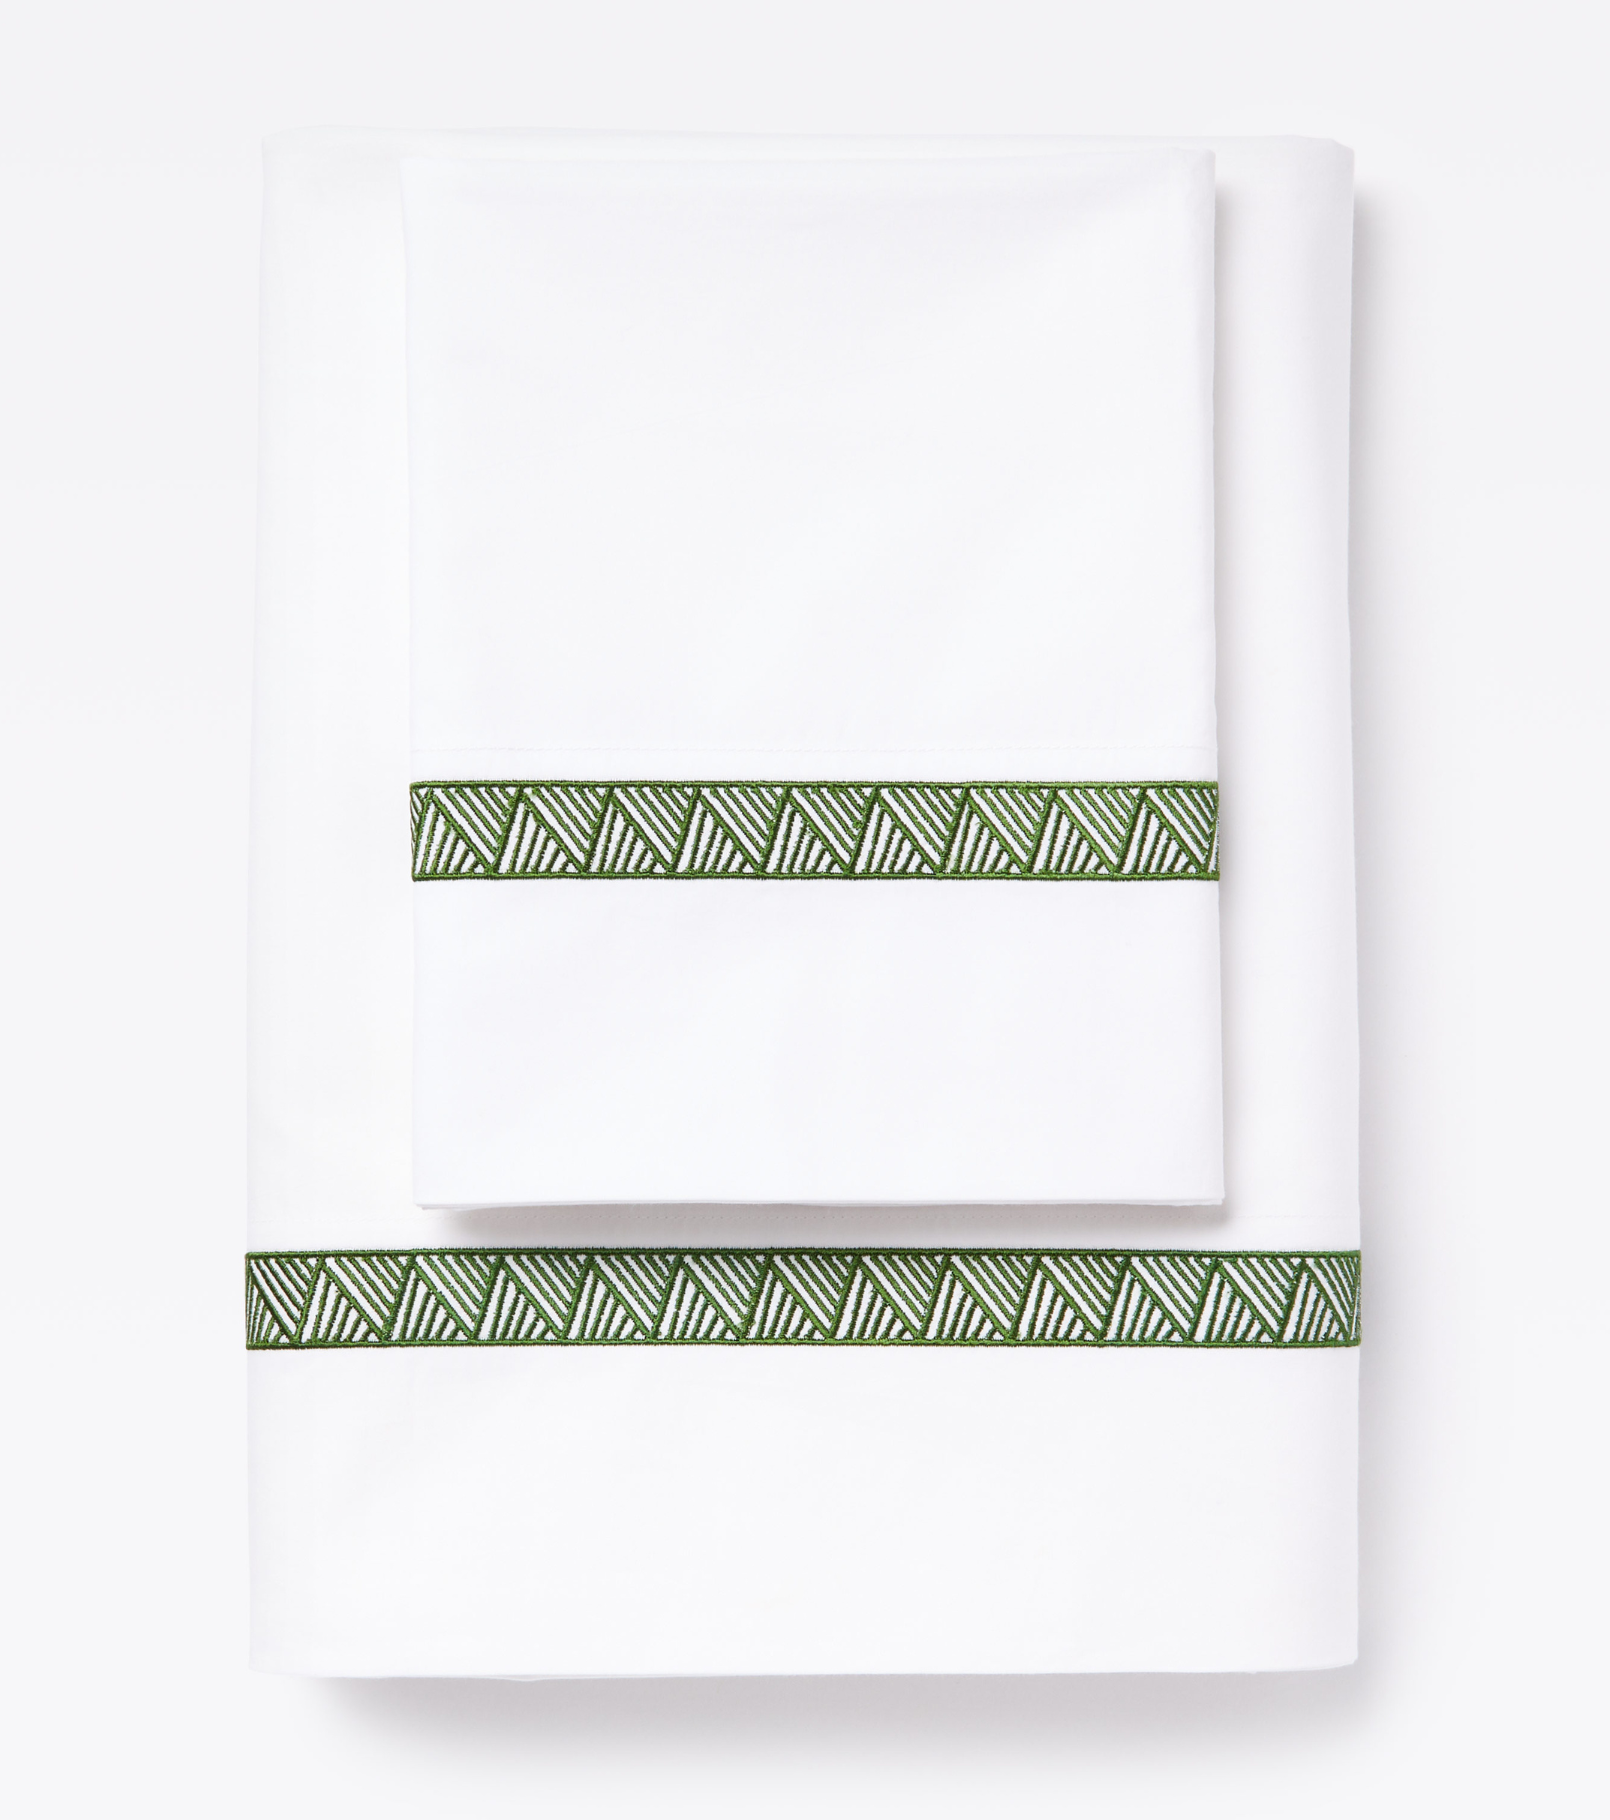 Averylily Weave Sheet Set in White with embroidered trim in Palm Green. 510-thread count pure cotton percale.